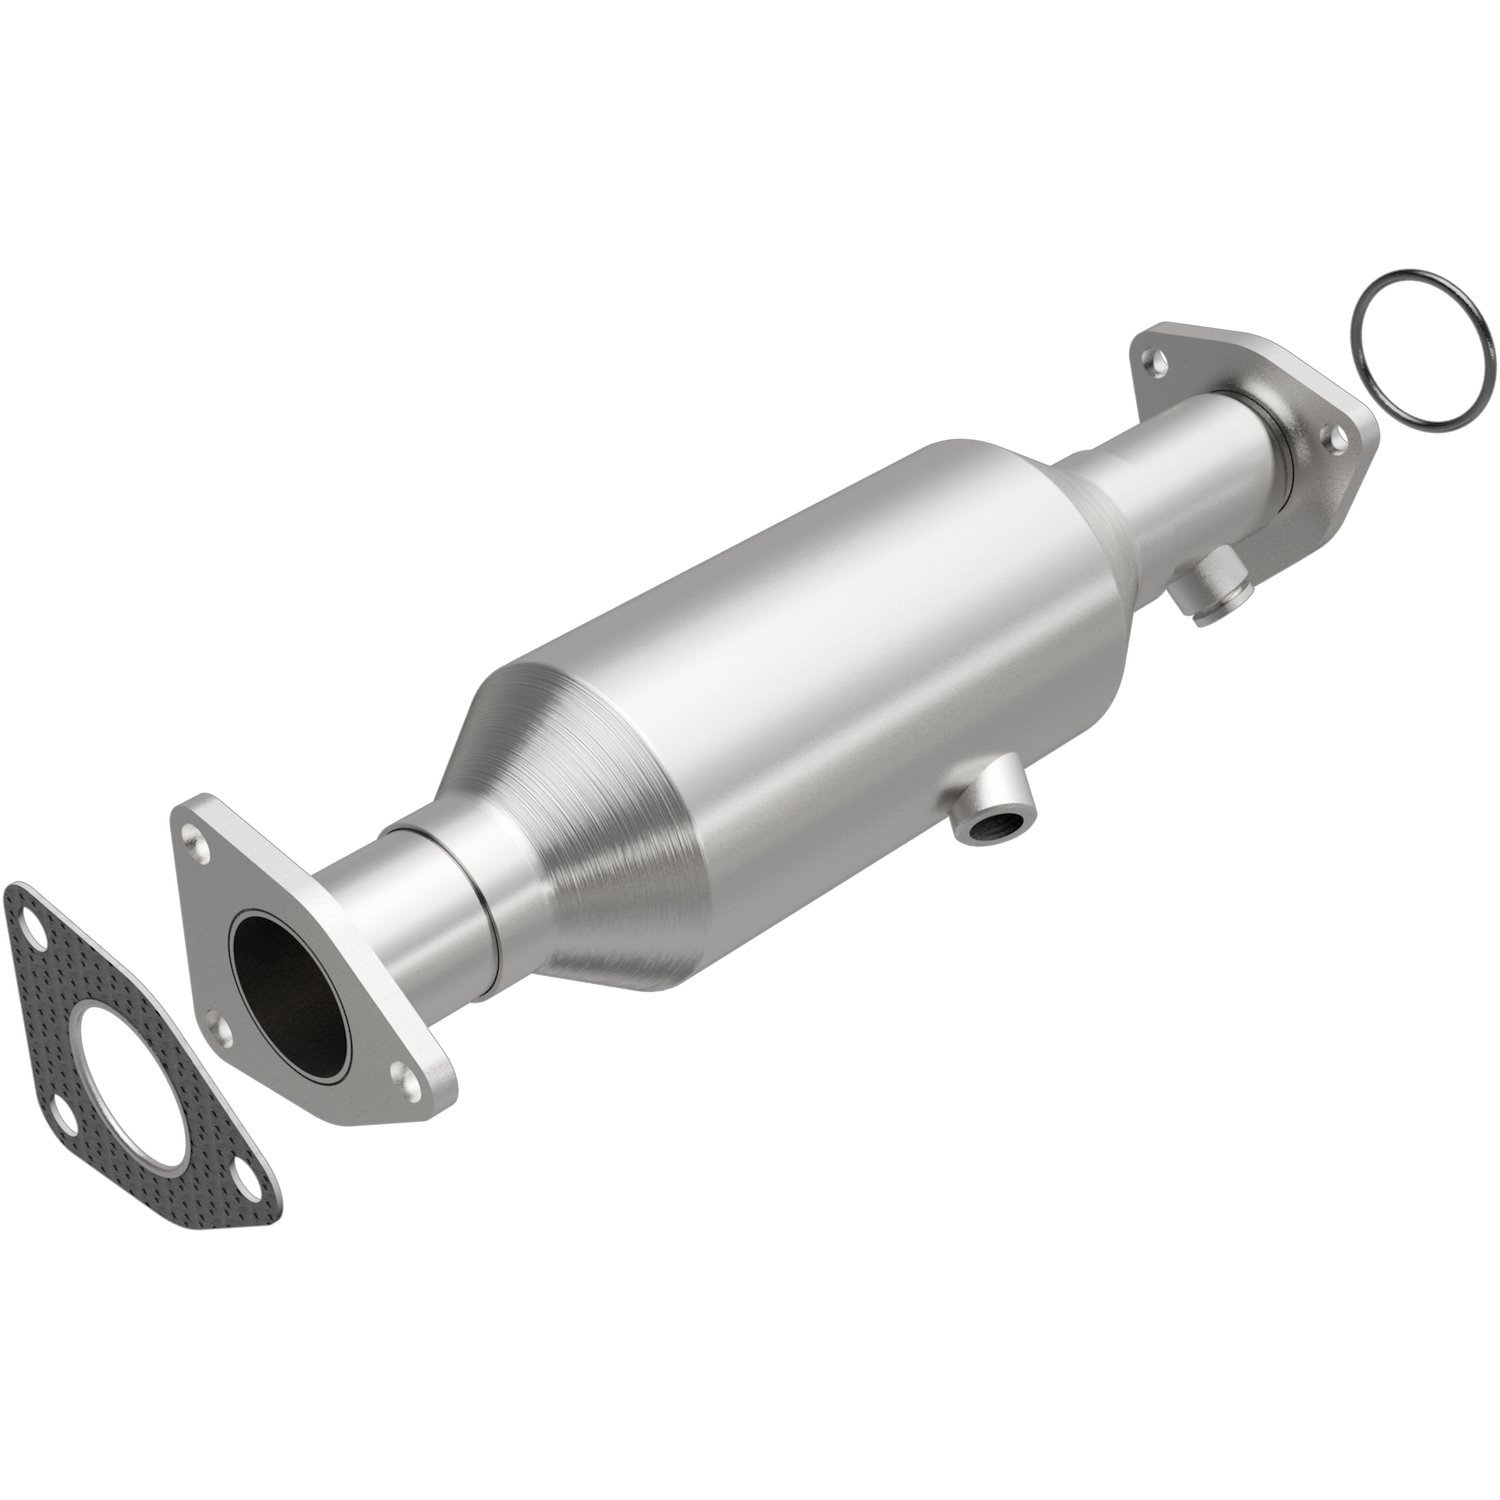 OEM Grade Federal / EPA Compliant Direct-Fit Catalytic Converter 49258